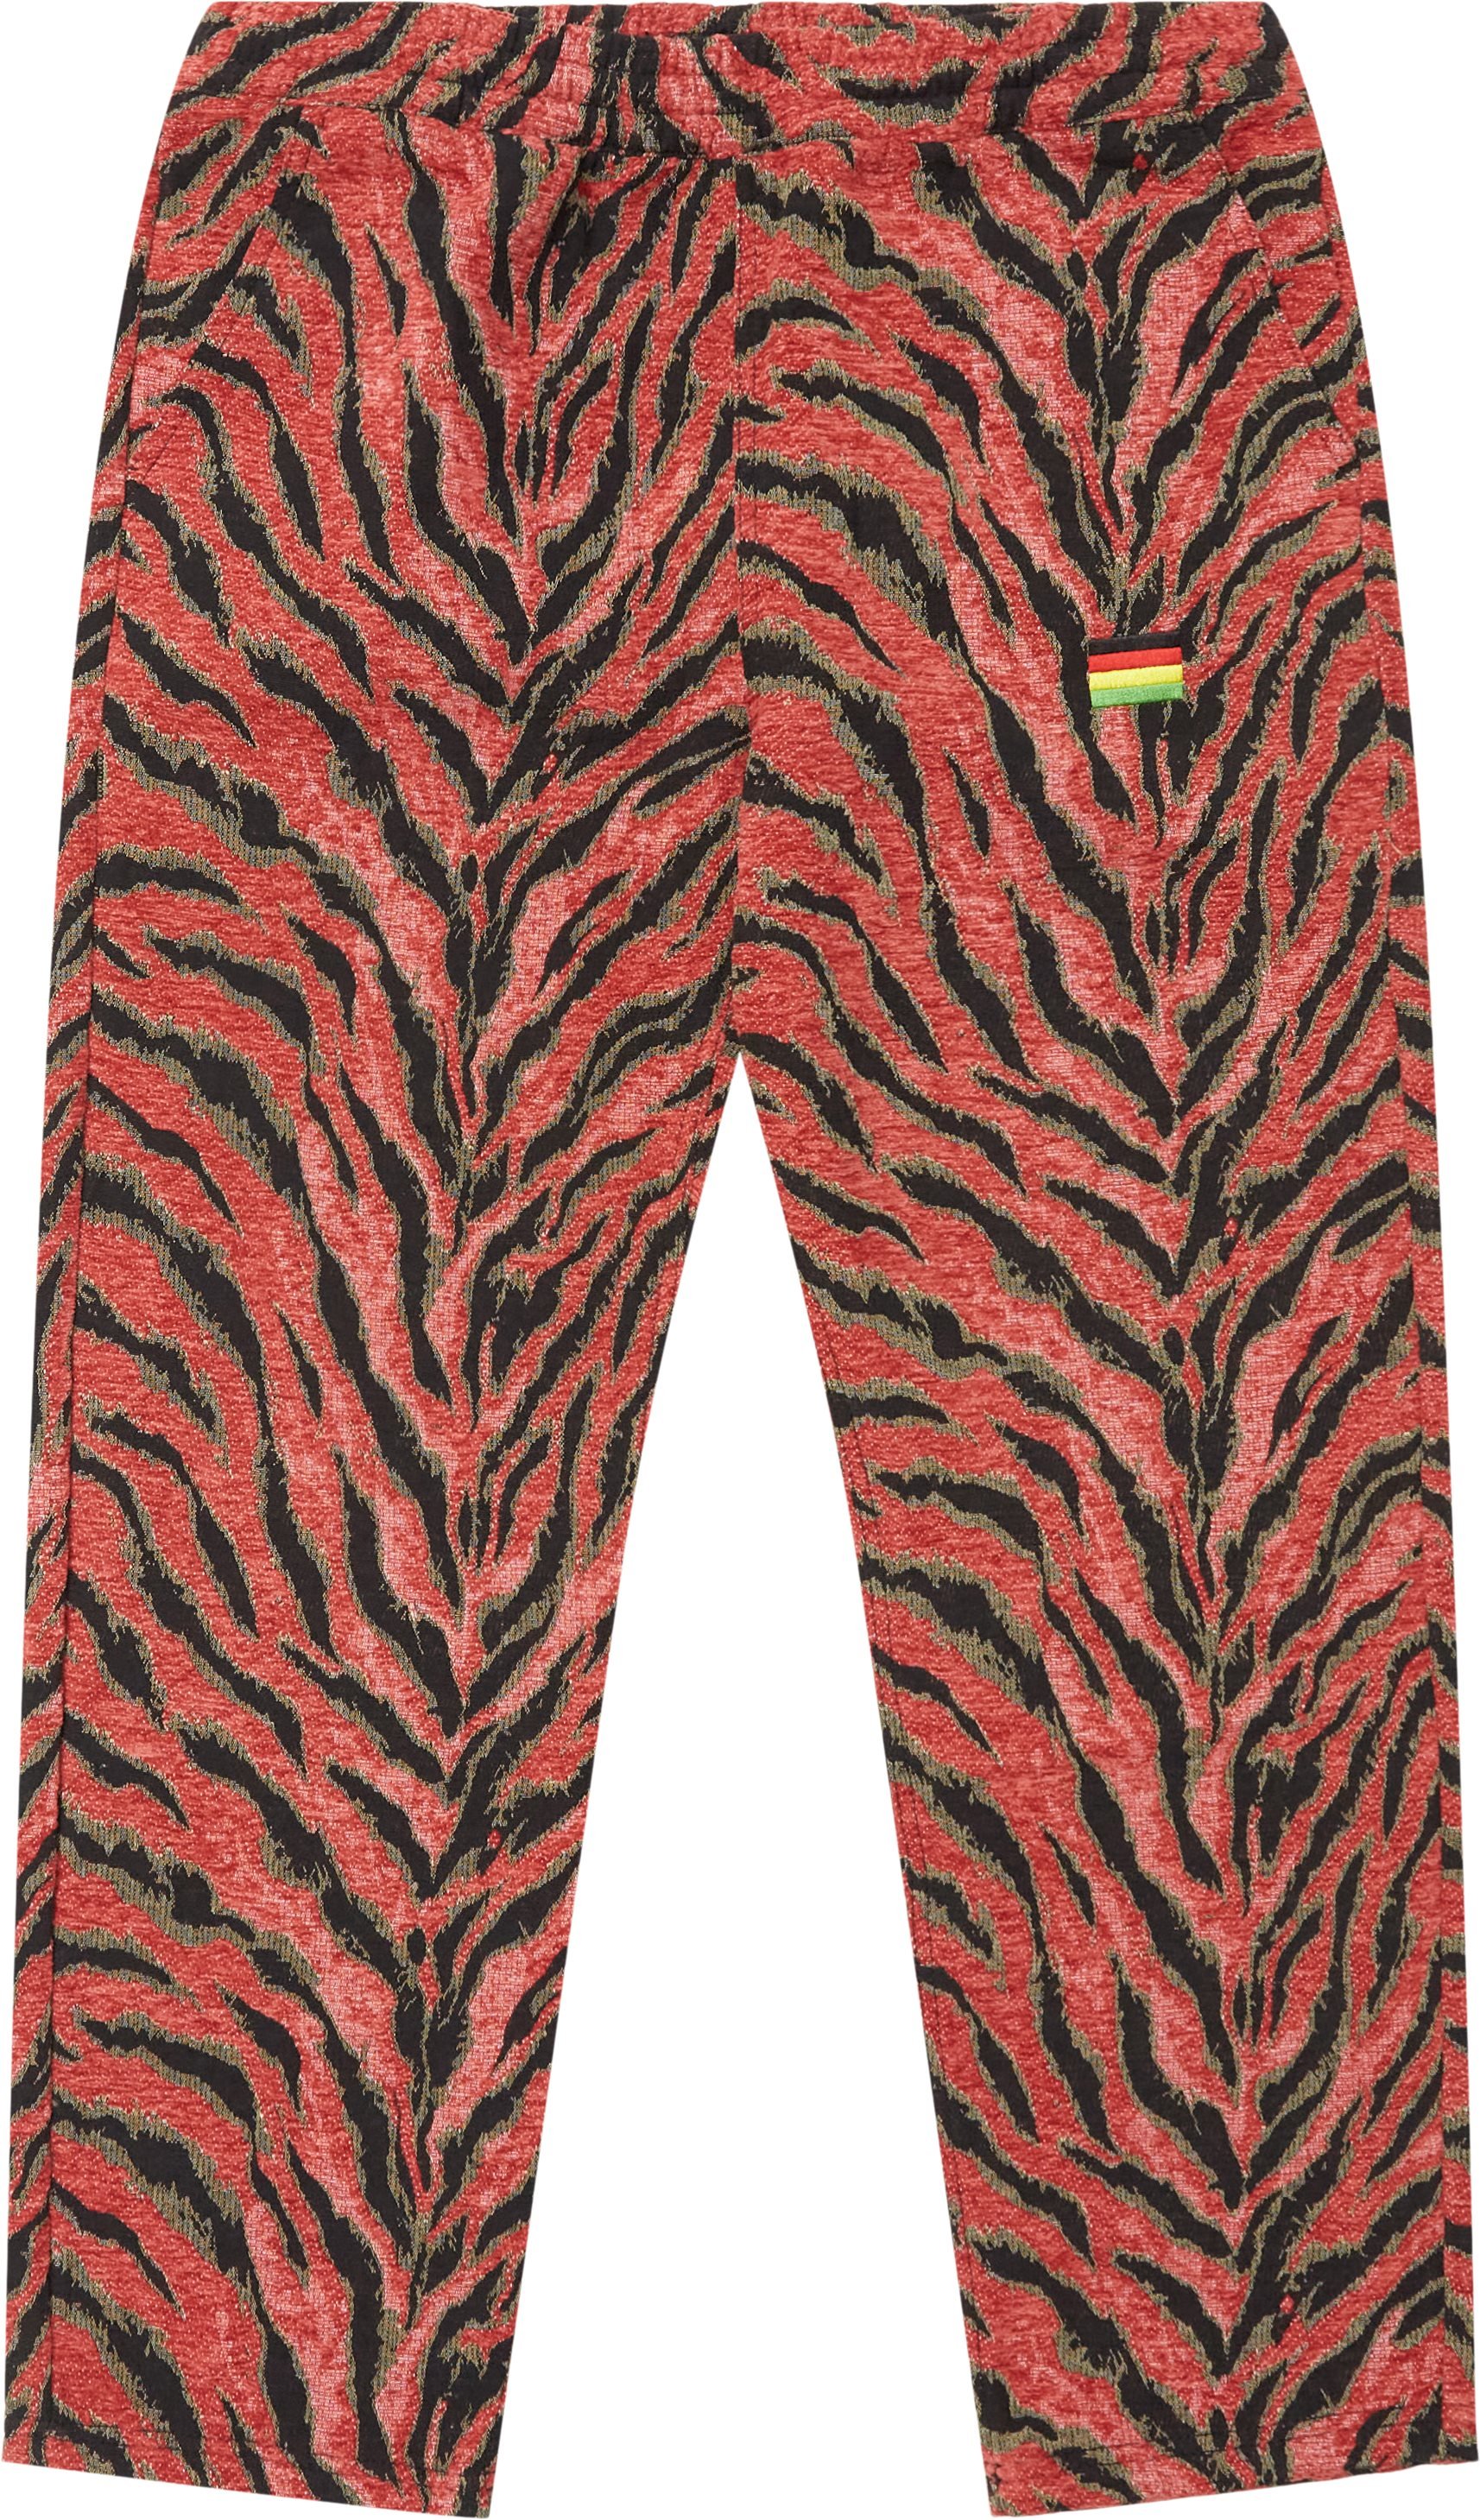 Jungle Sweatpants - Trousers - Loose fit - Red